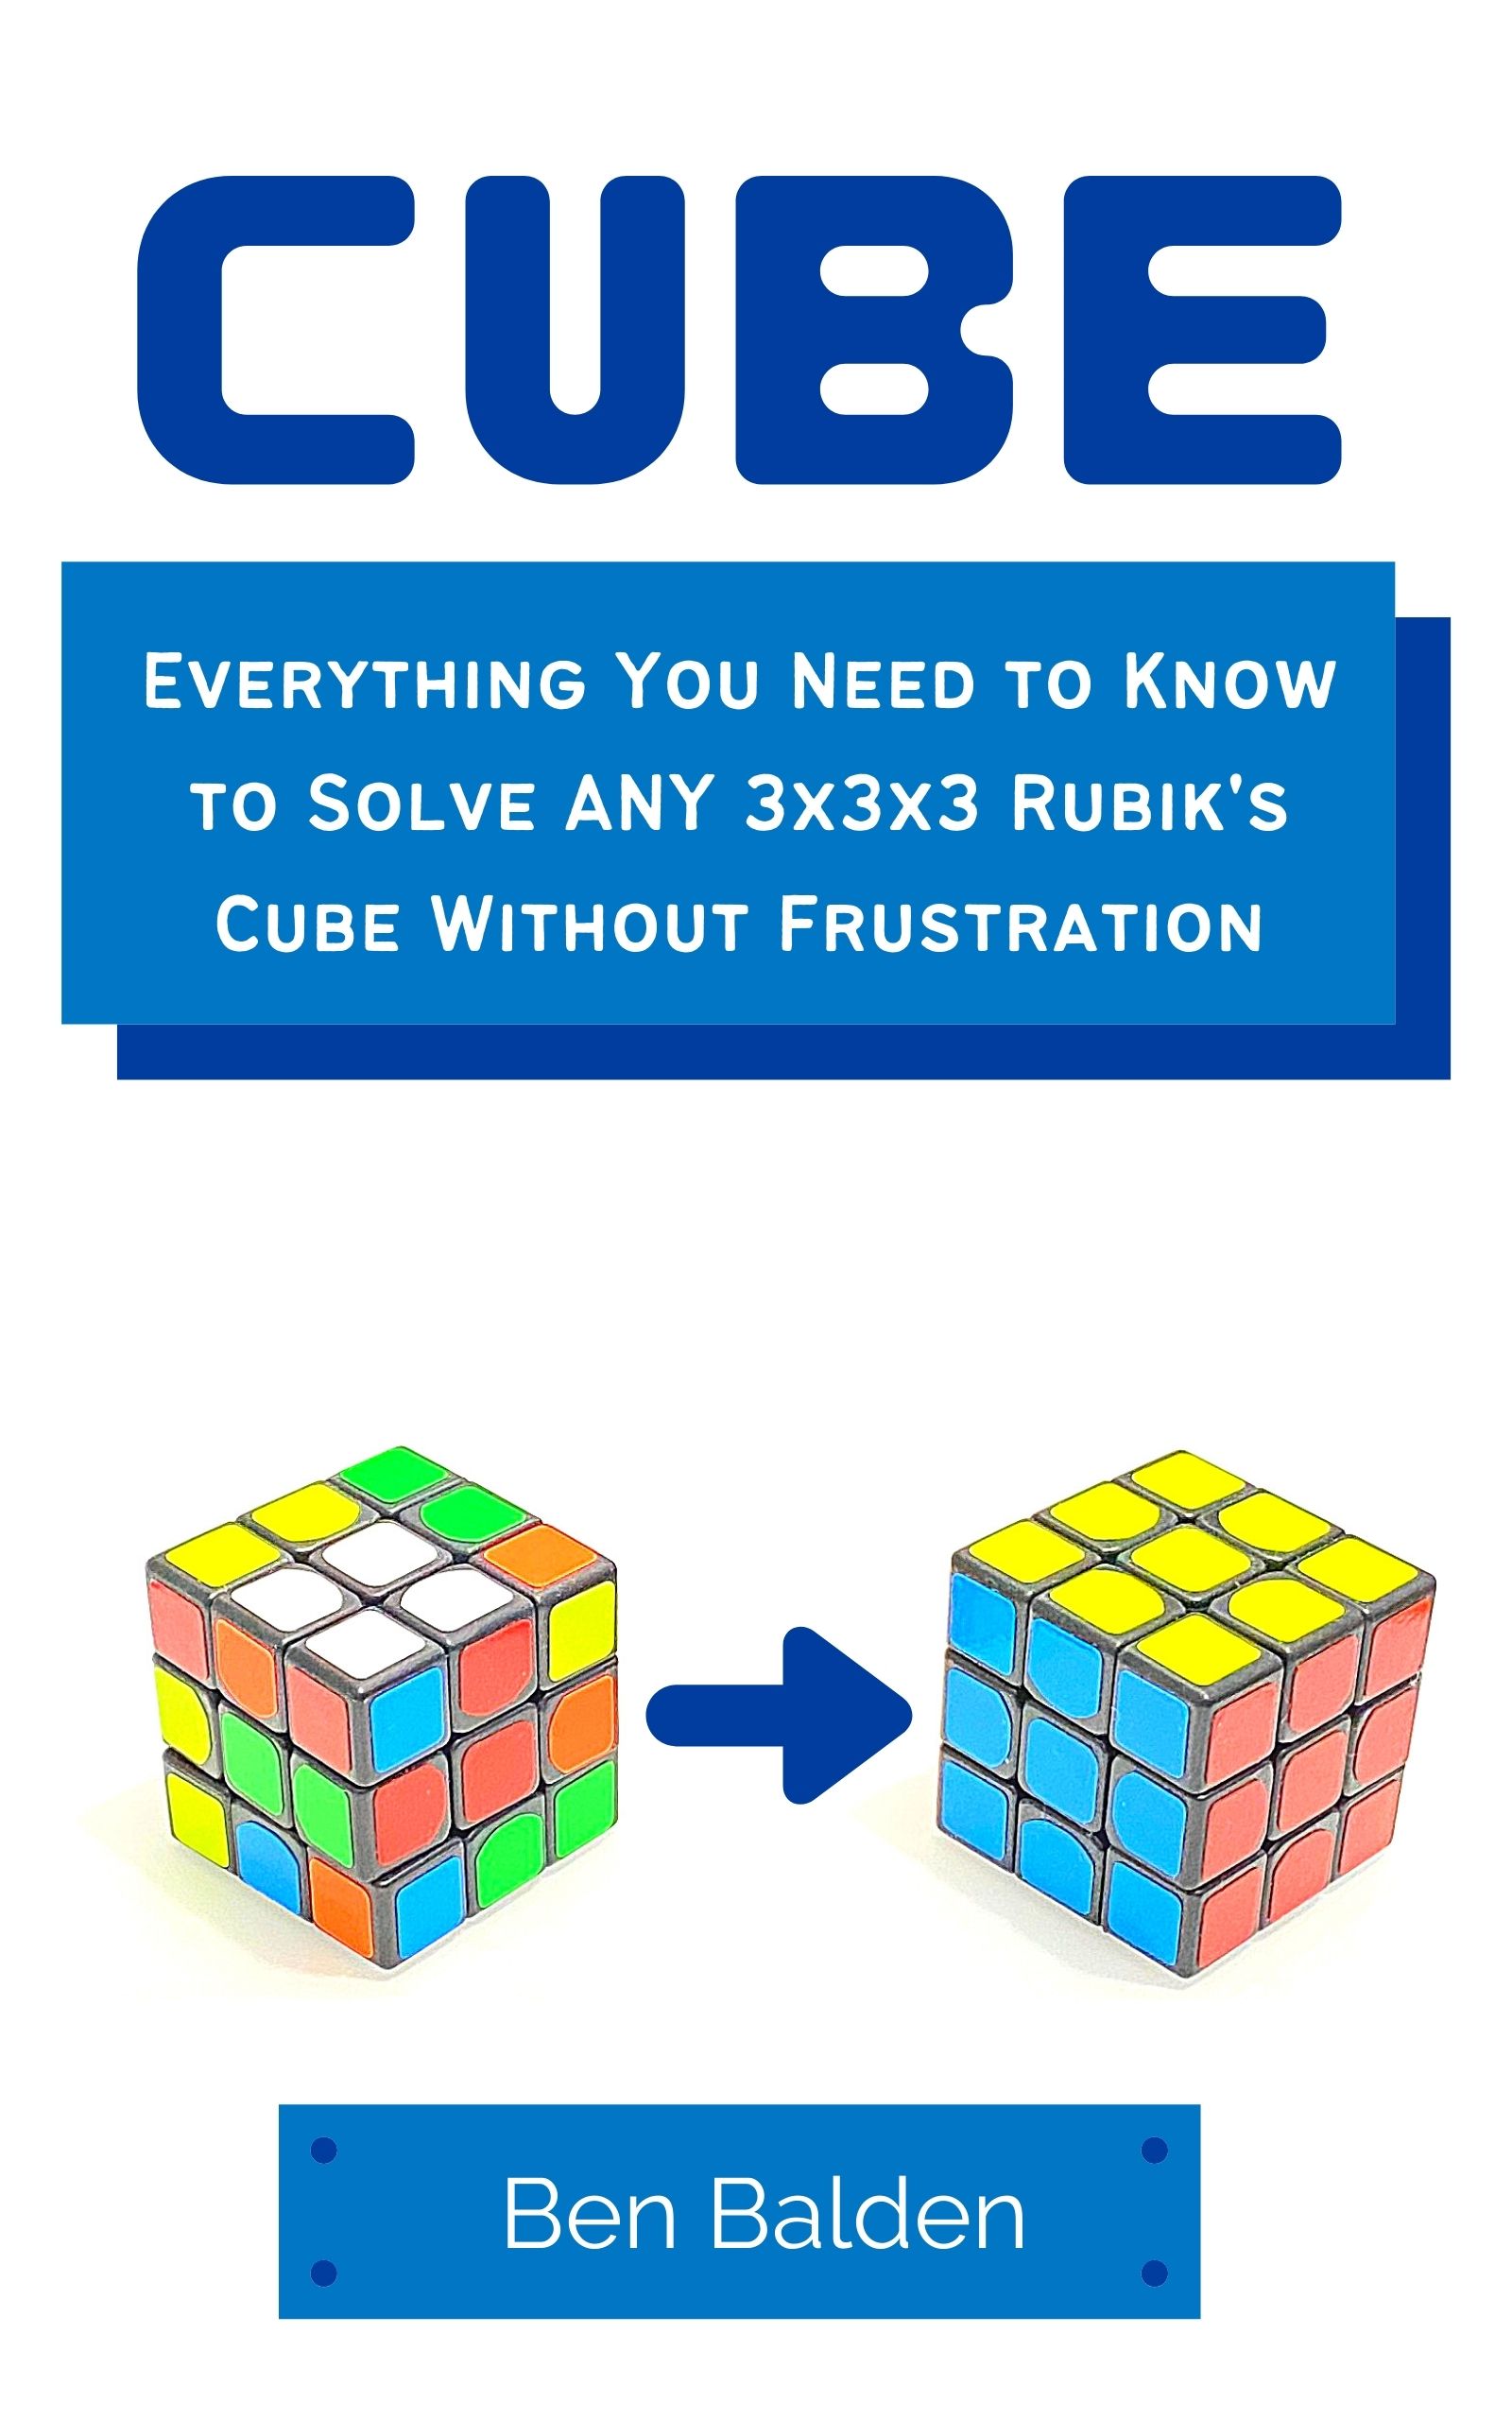 Easiest Solve – Easiest Way to Solve a Rubik's Cube – Anyone Can Solve a  Rubik's cube